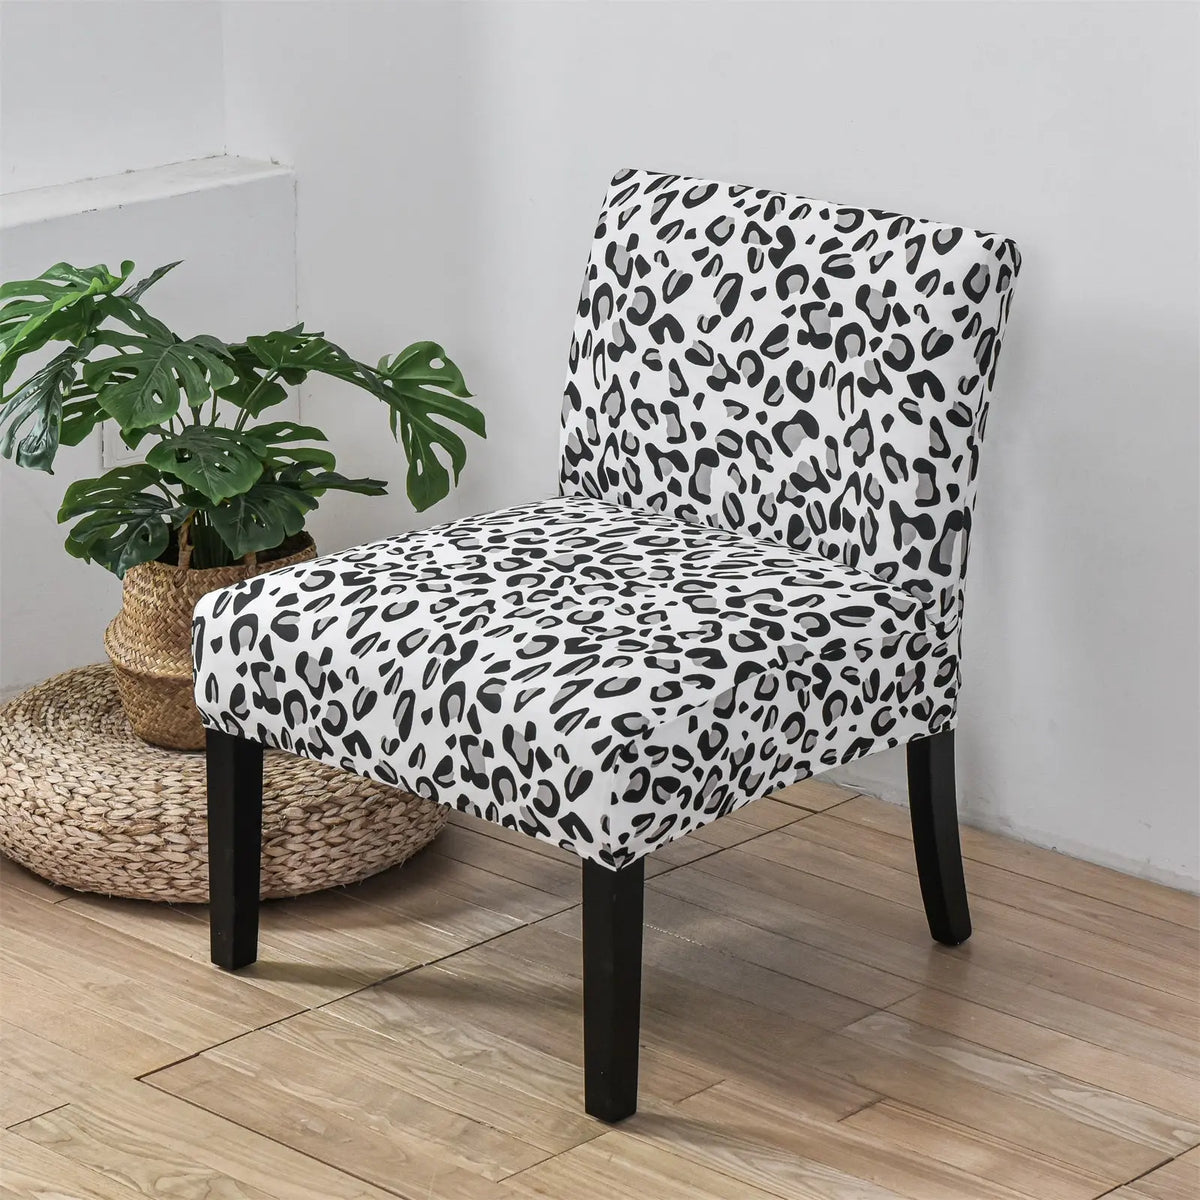 Removable Armless Chair Slipcover Printed Stretch Accent Chair Protector Cover Crfatop %sku%